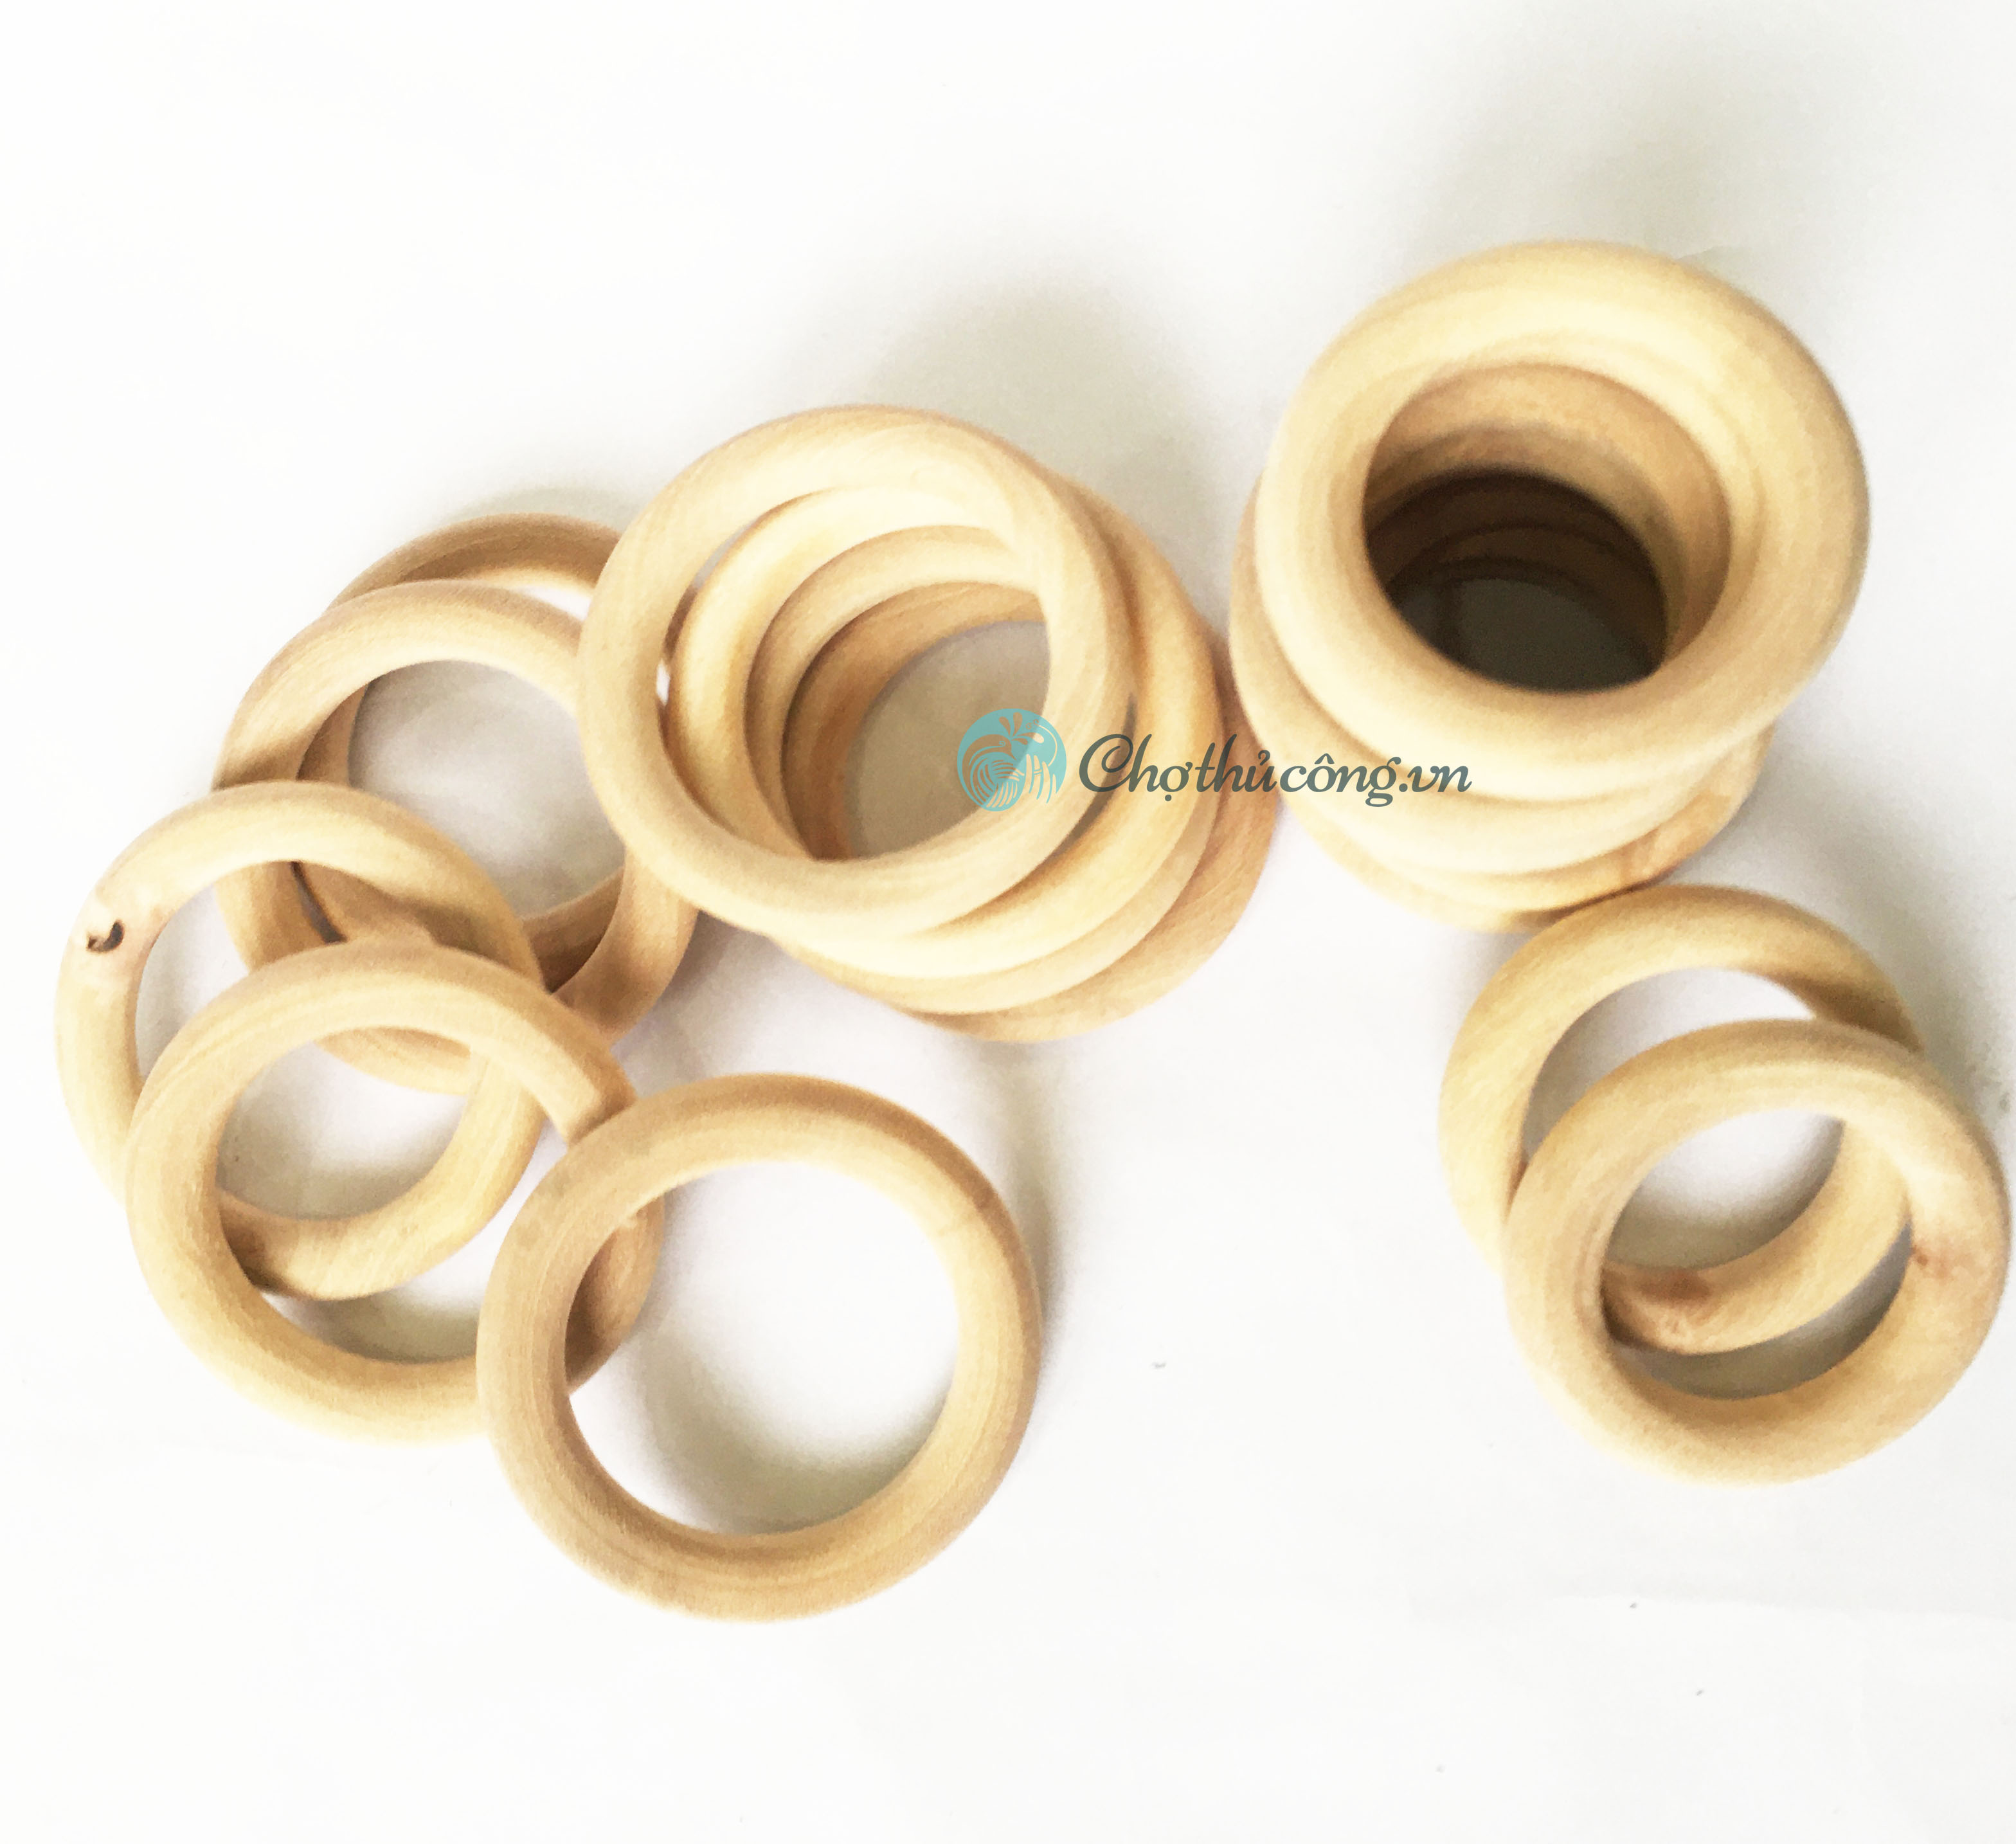 120Pcs Natural Wood Rings Set, Unfinished Macrame Wooden Ring, Wood Circles  for DIY Craft, Ring Pendant Jewelry Making 